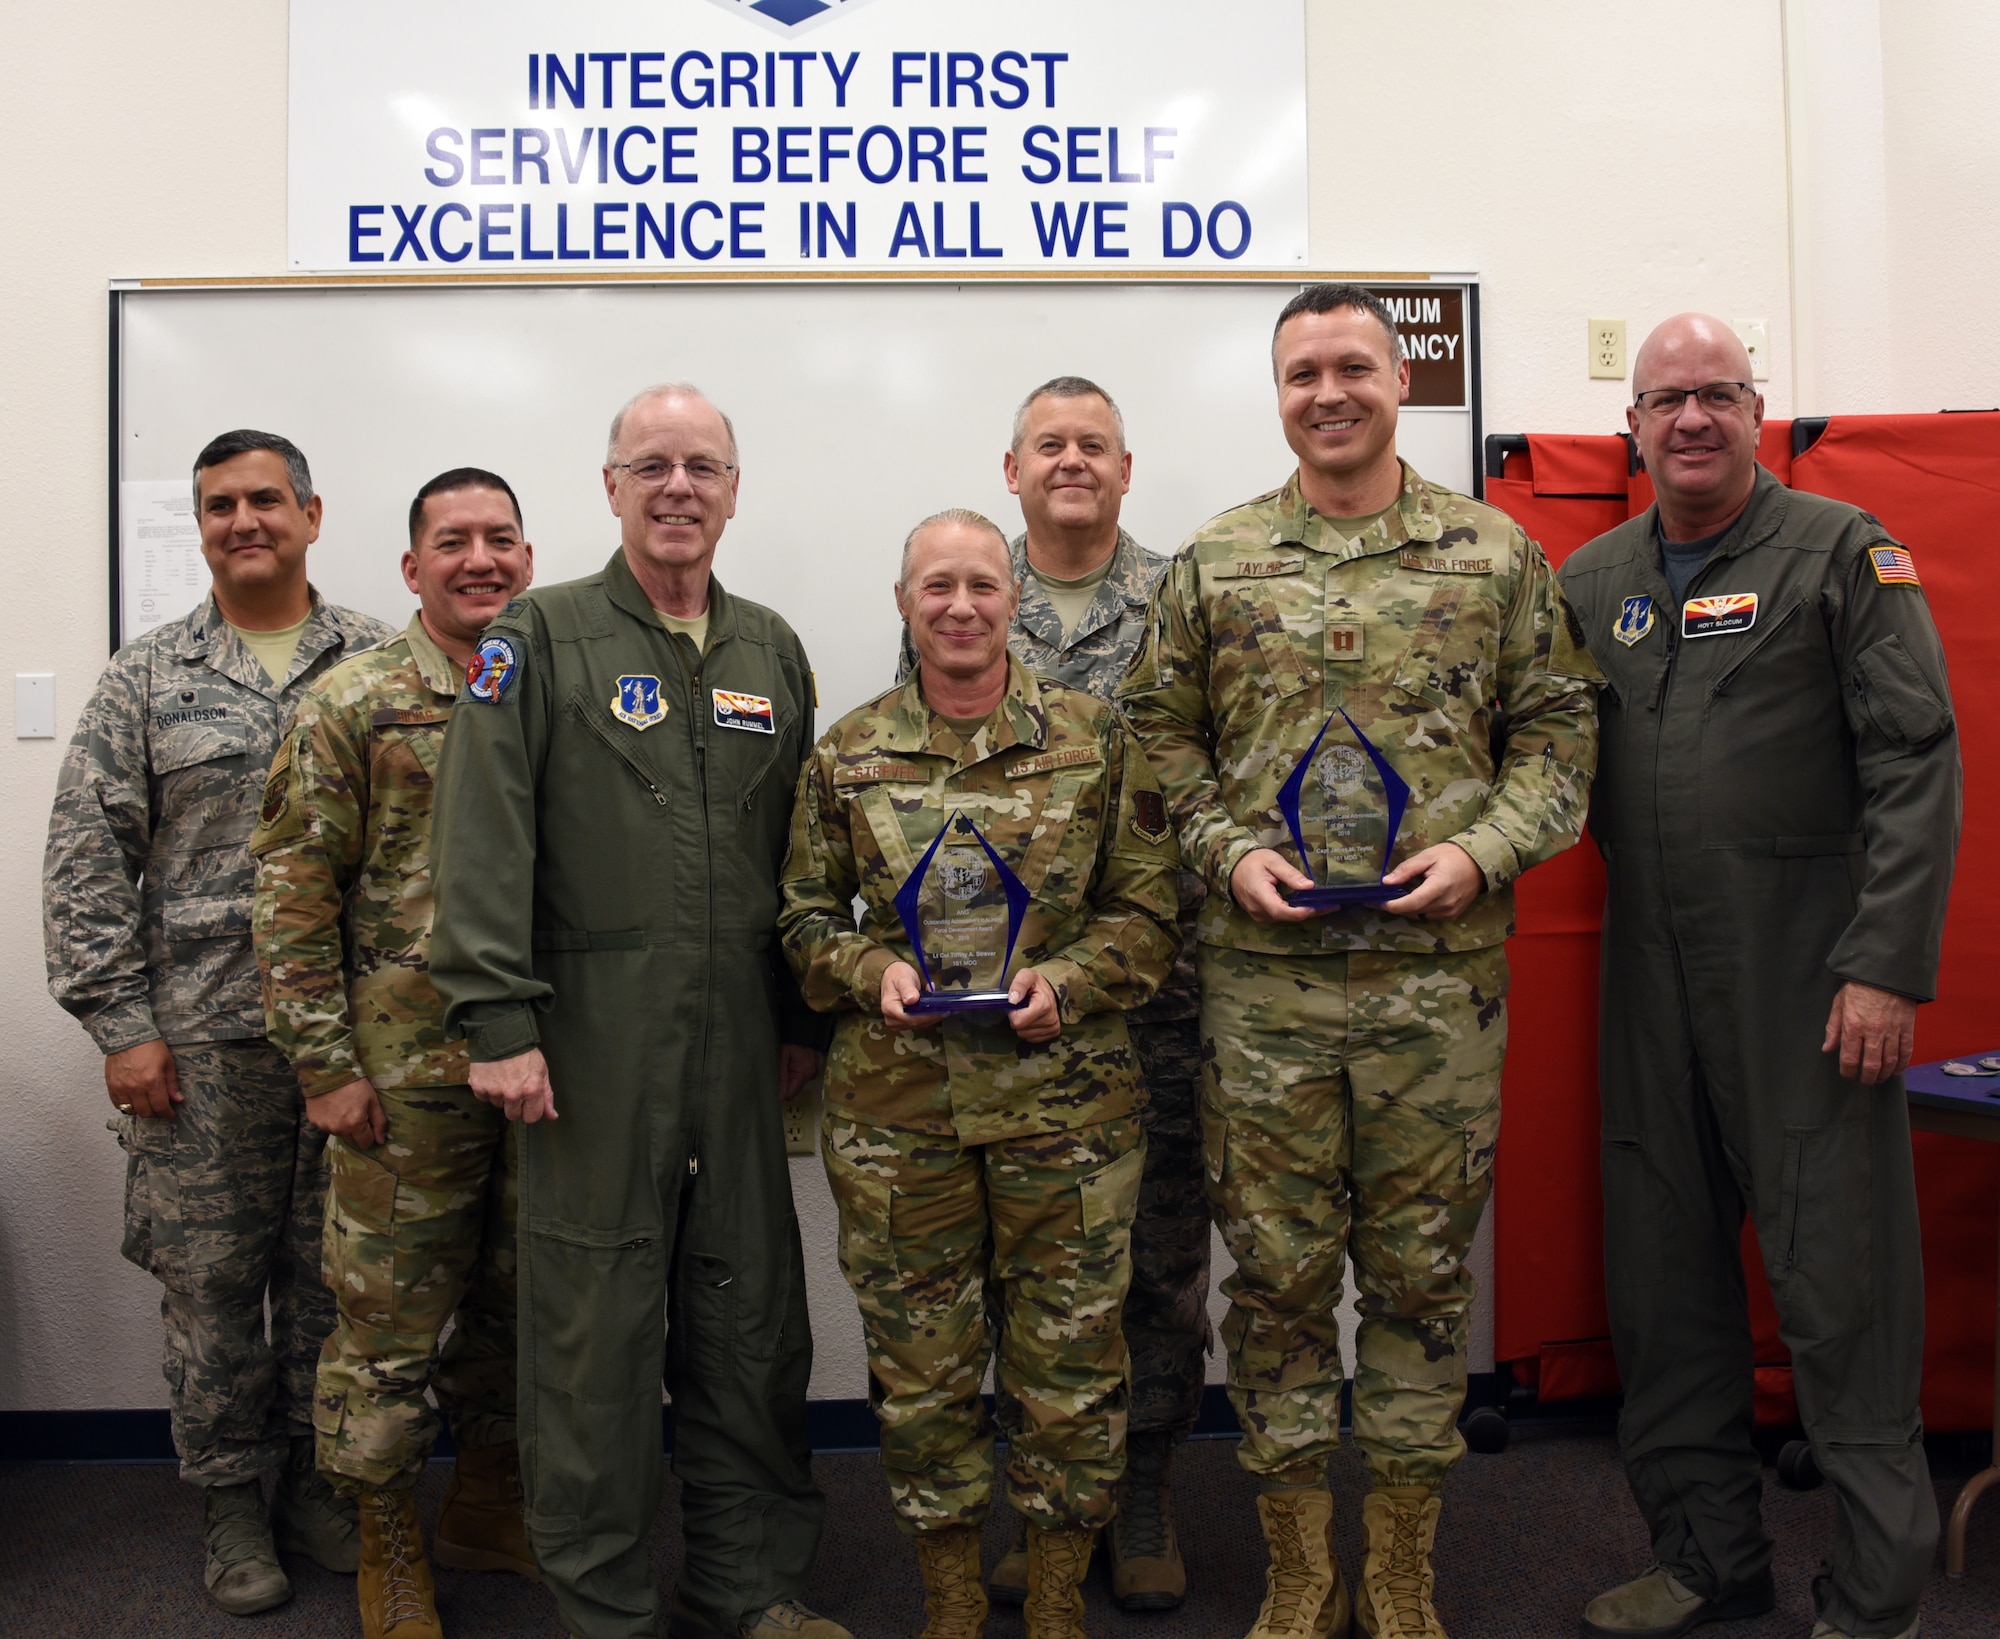 Lt. Col. Tiffiny Strever, 161st MDG Chief Nurse and Capt. James Taylor, 161st MDG medical readiness officer were presented awards from the Air National Guard Medical Service Annual Awards program at Goldwater Air National Guard Base, Phoenix, Nov. 2, 2019. (U.S. Air National Guard photo by Tech. Sgt. Michael Matkin)